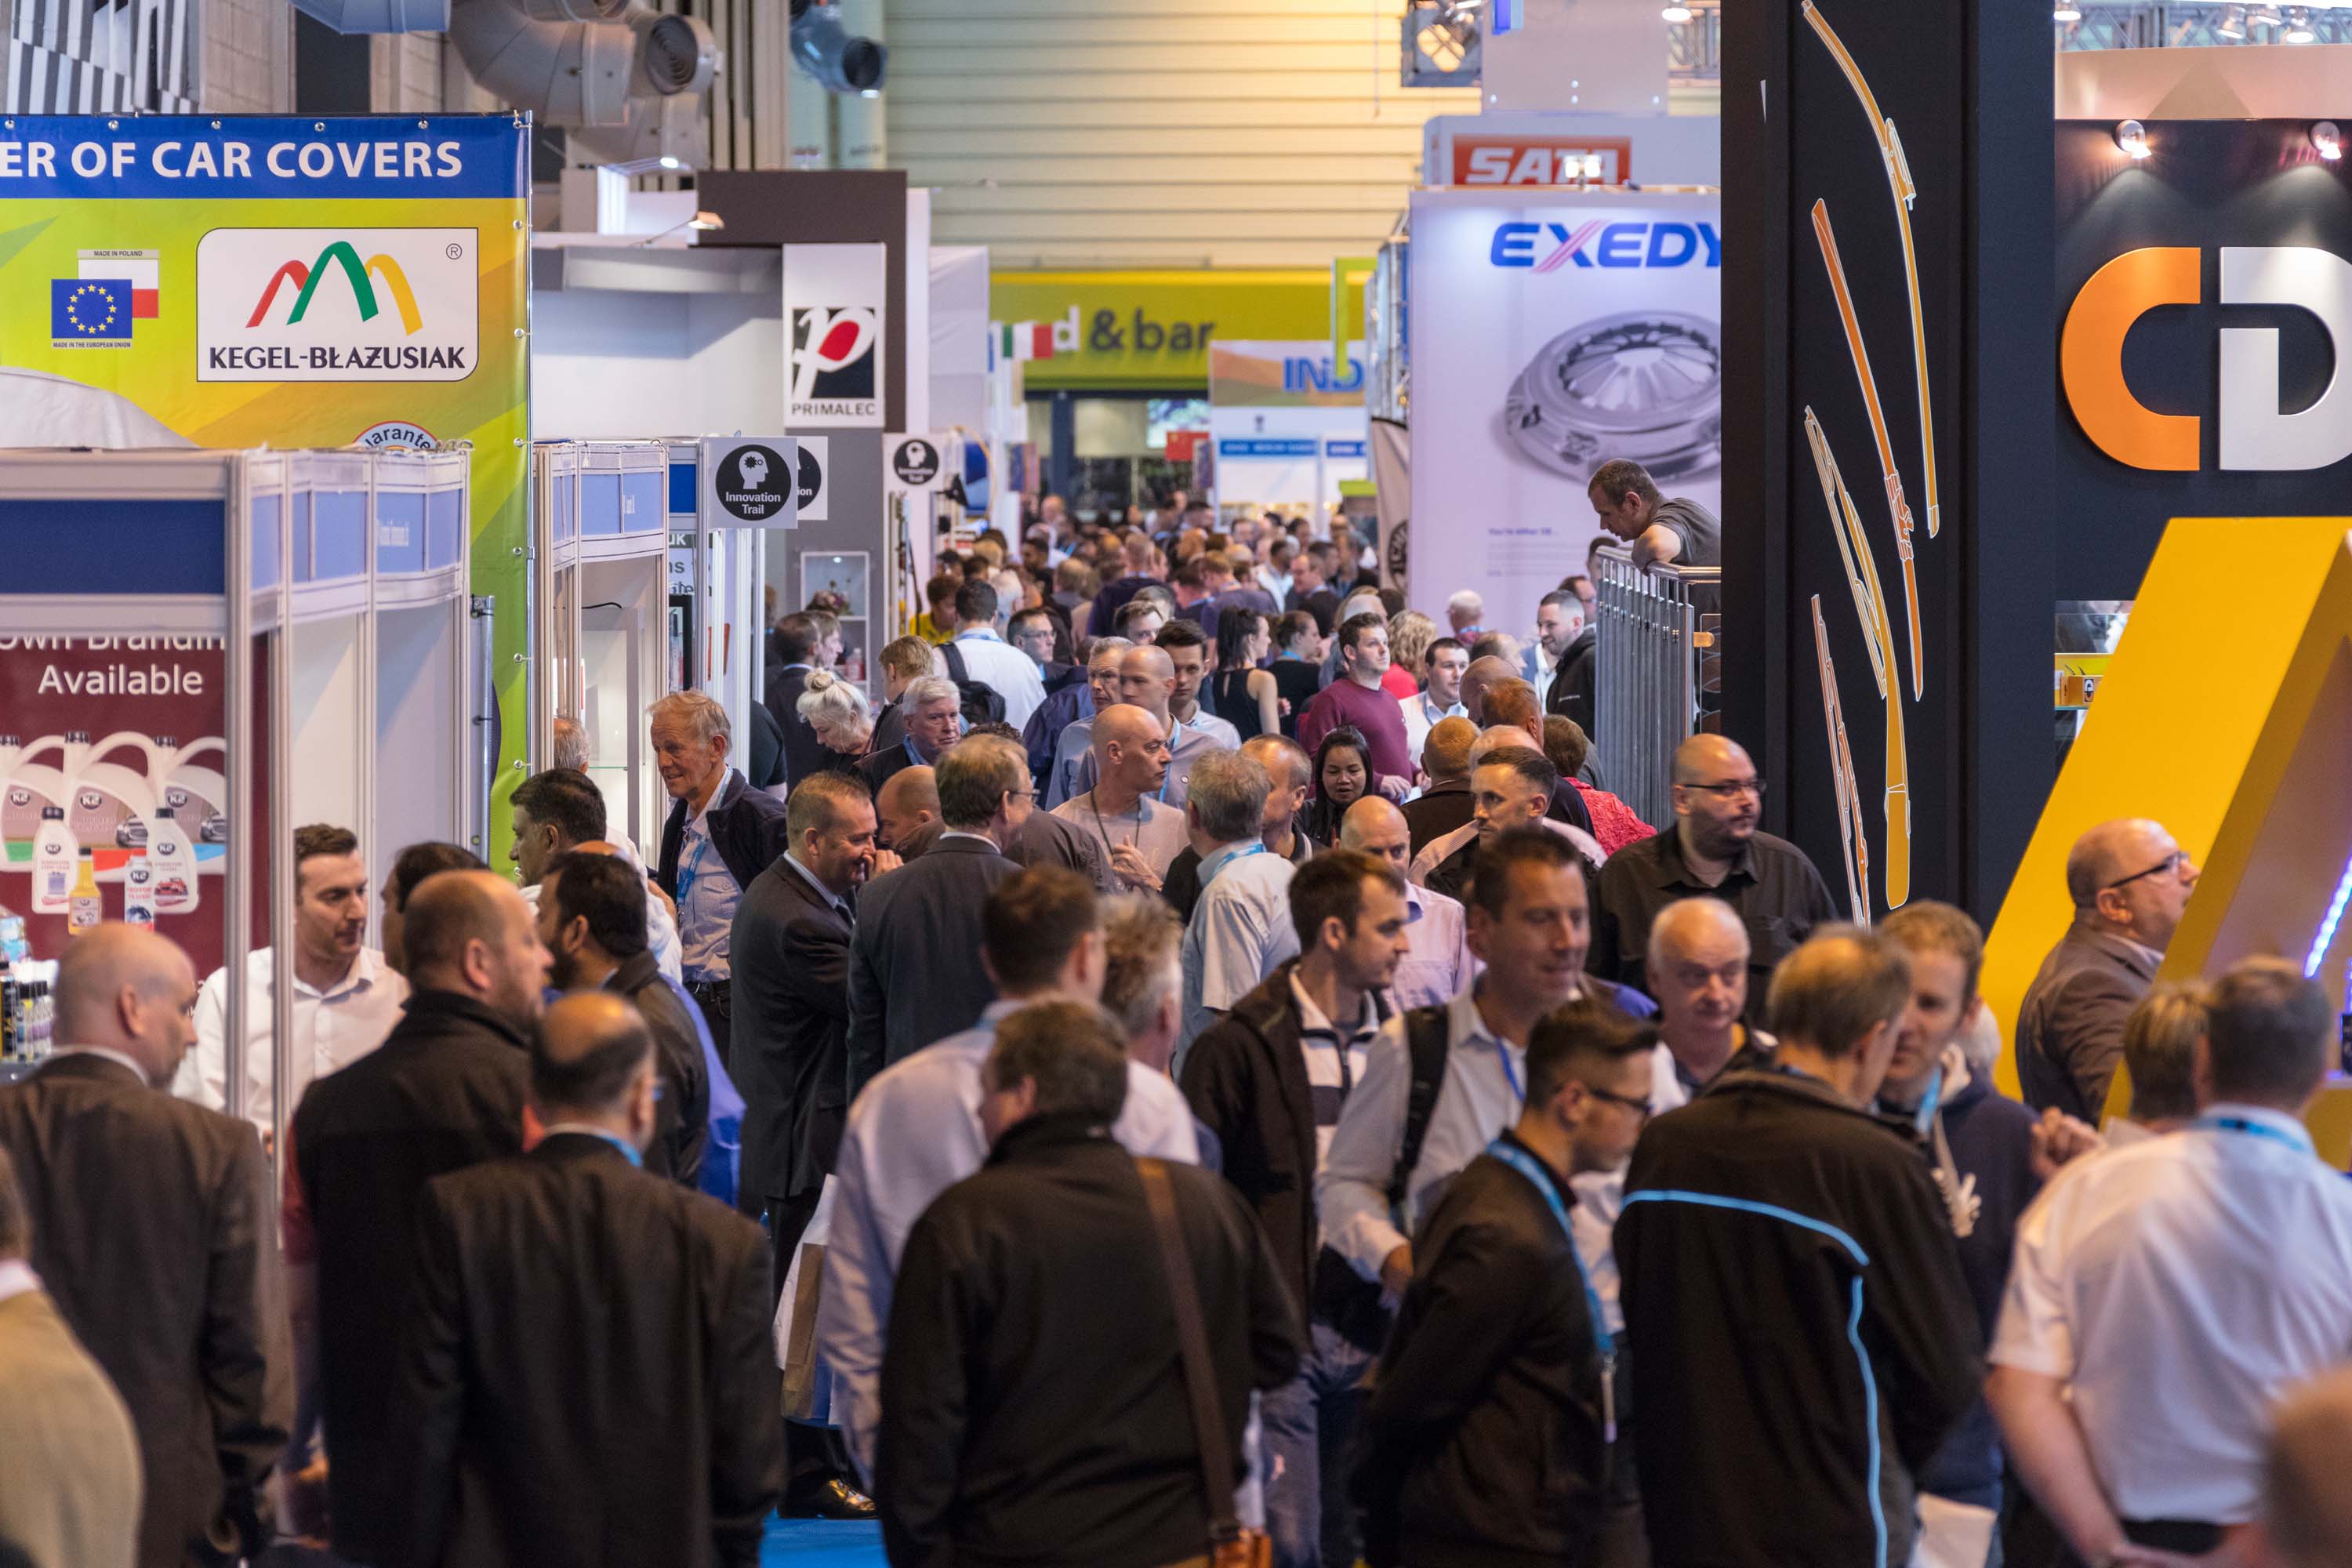 Less than a month to go for Automechanika Birmingham